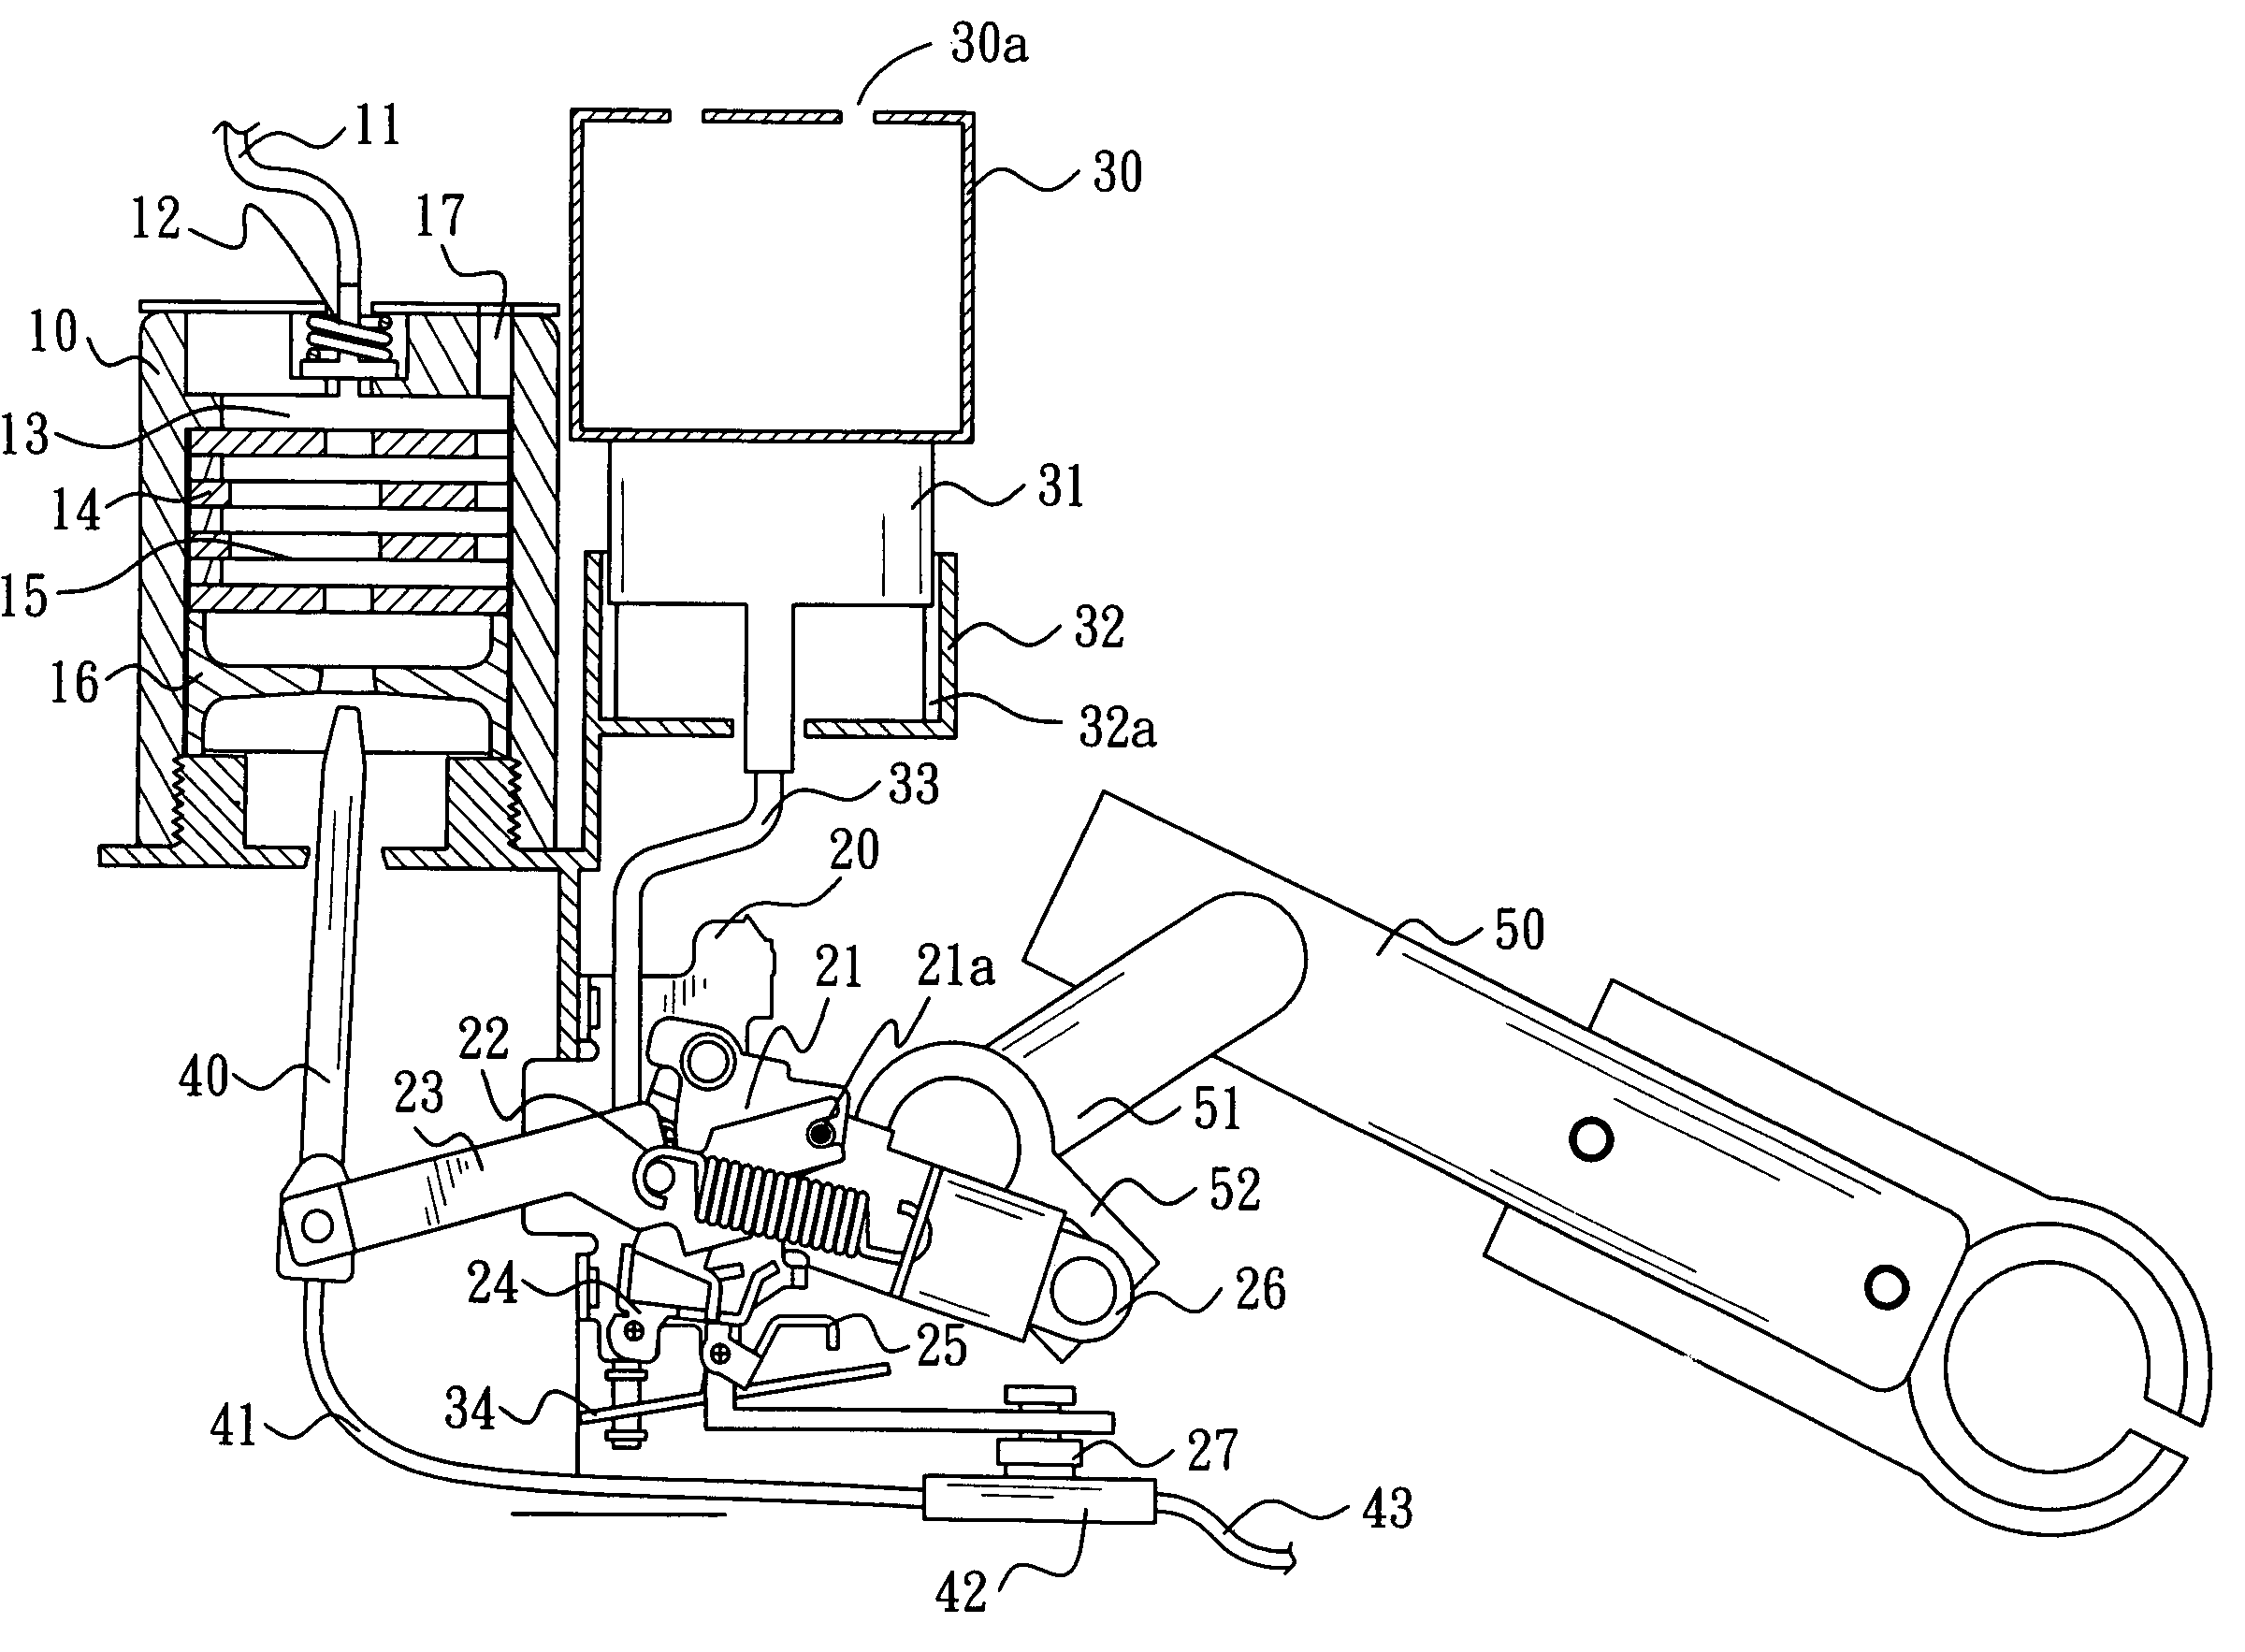 Oil-immersed and high-pressure tripping switch structure